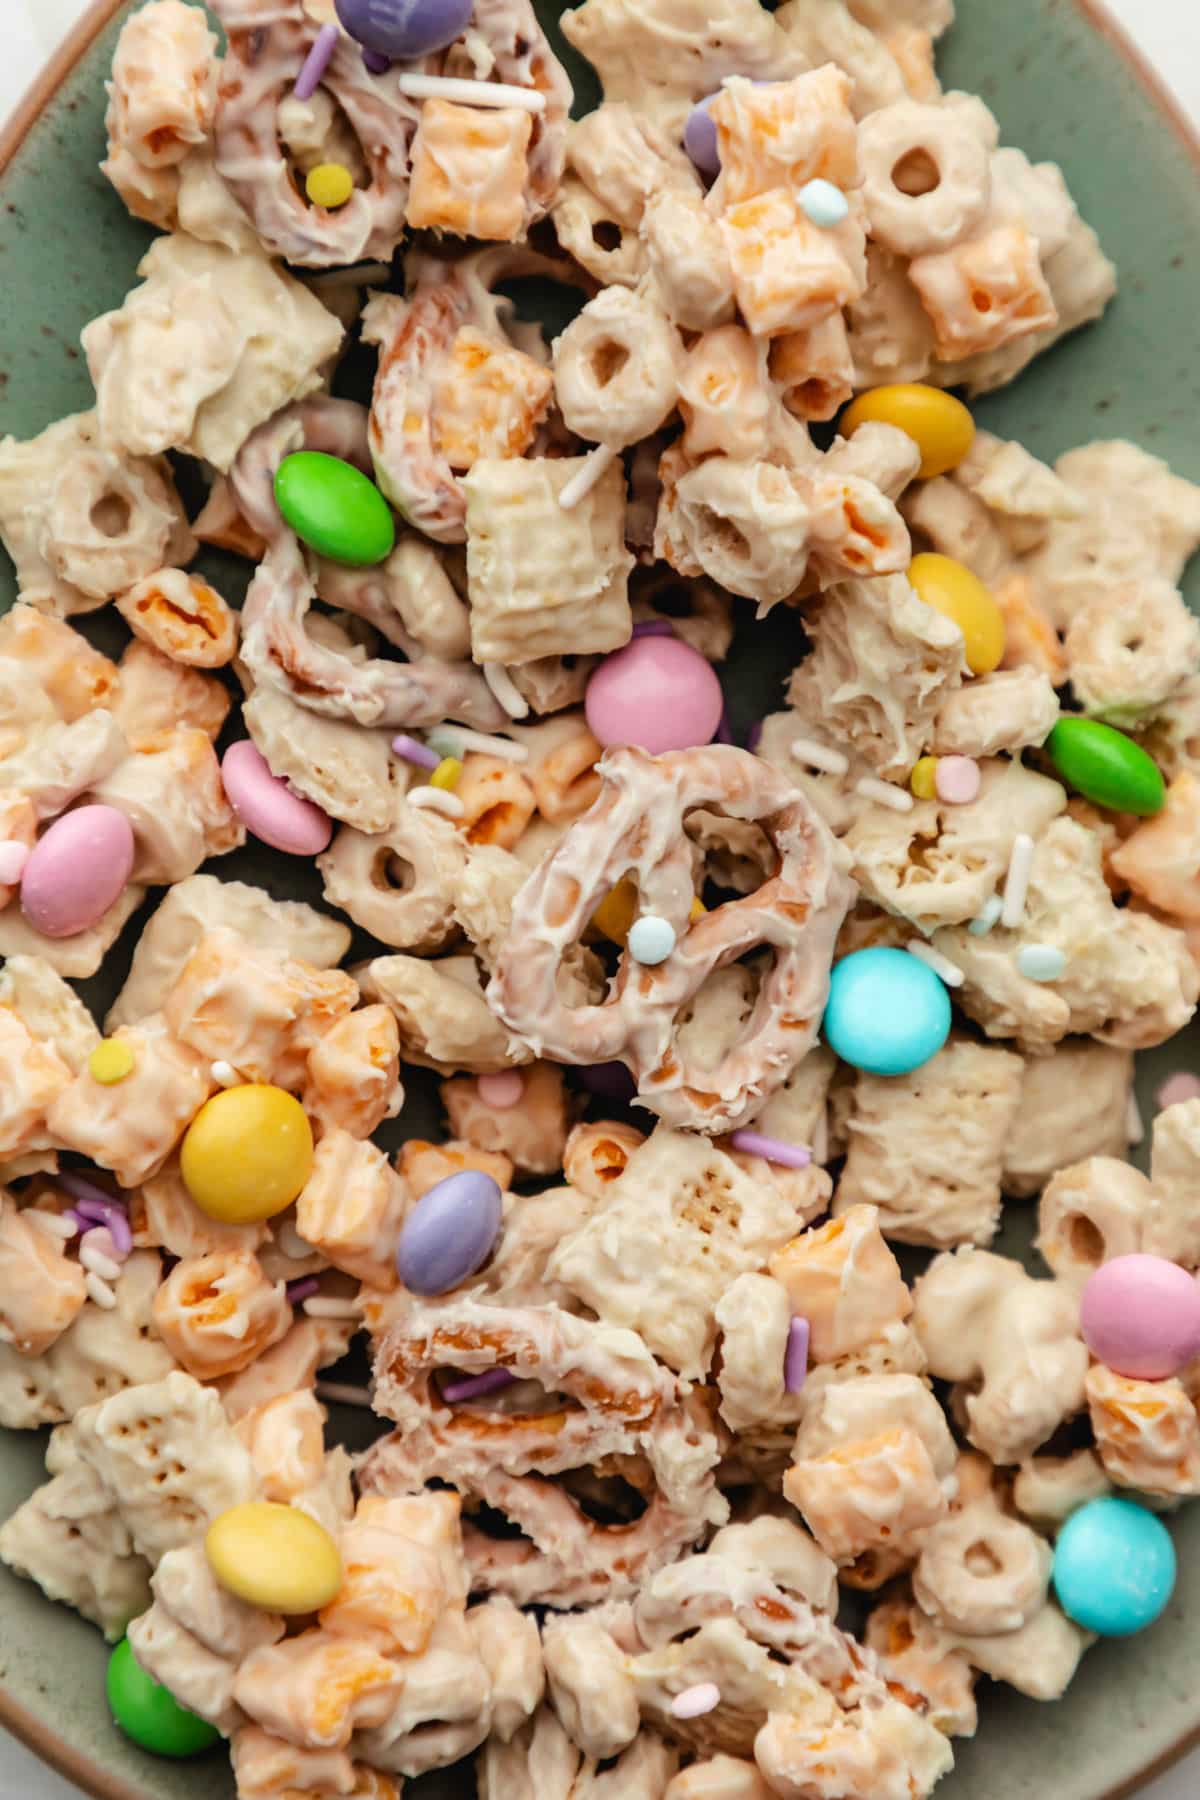 Sprinkles and M&Ms on top of bunny bait.